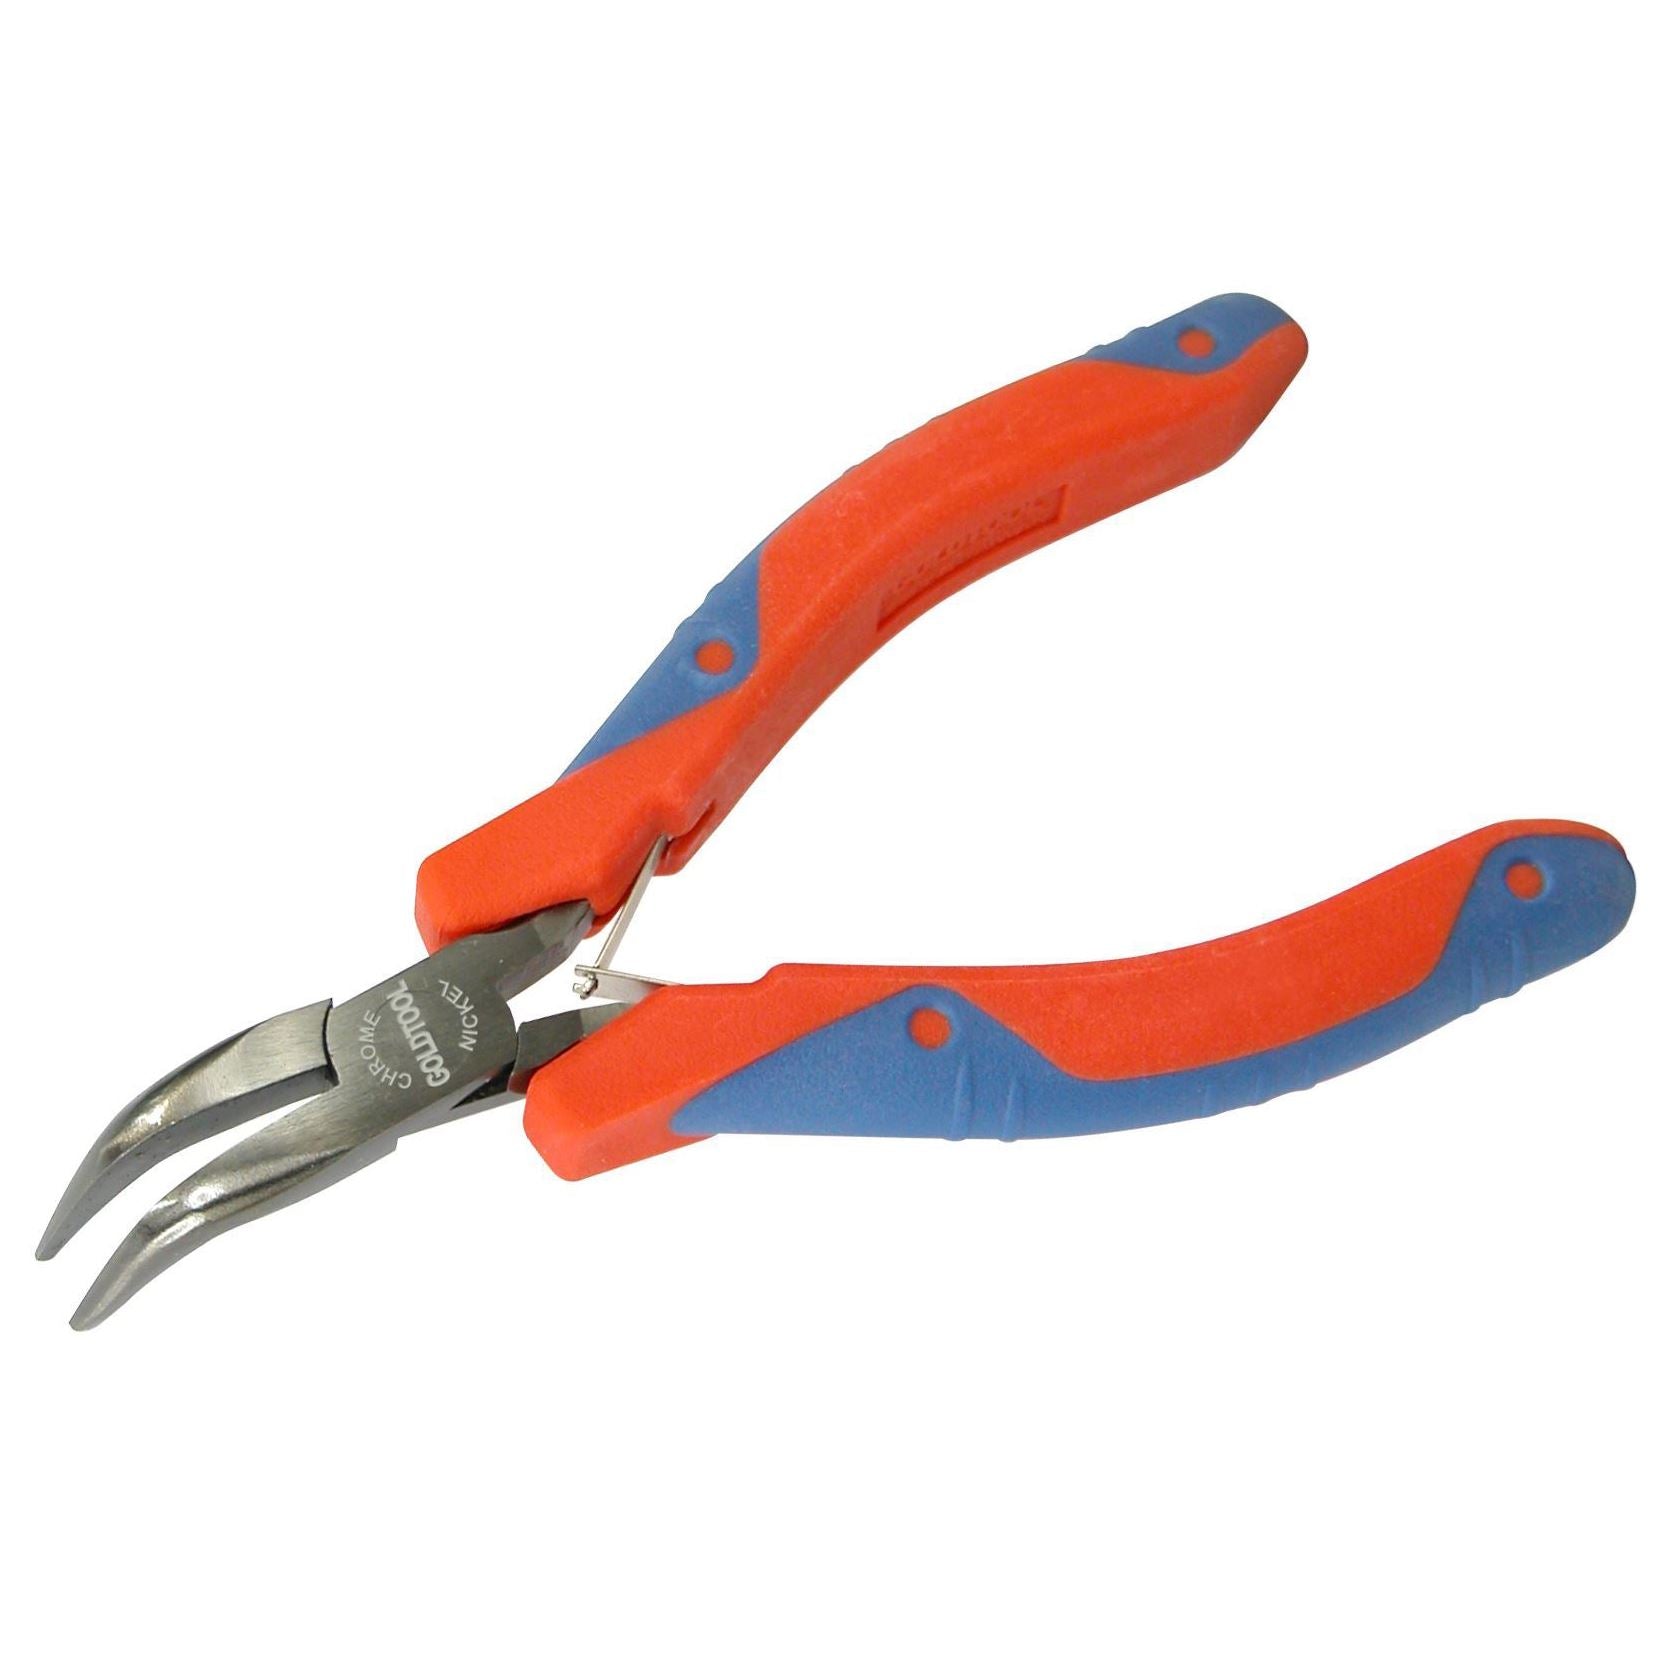 GOLDTOOL_120mm_Bent_Nose_Polished_CRV_Precision_Plier._28mm_Smooth_Jaws_Double_Leaf_Springs._Rubber_Easy_Grip_Handles_for_Greater_Comfort._Red/Blue_Colour